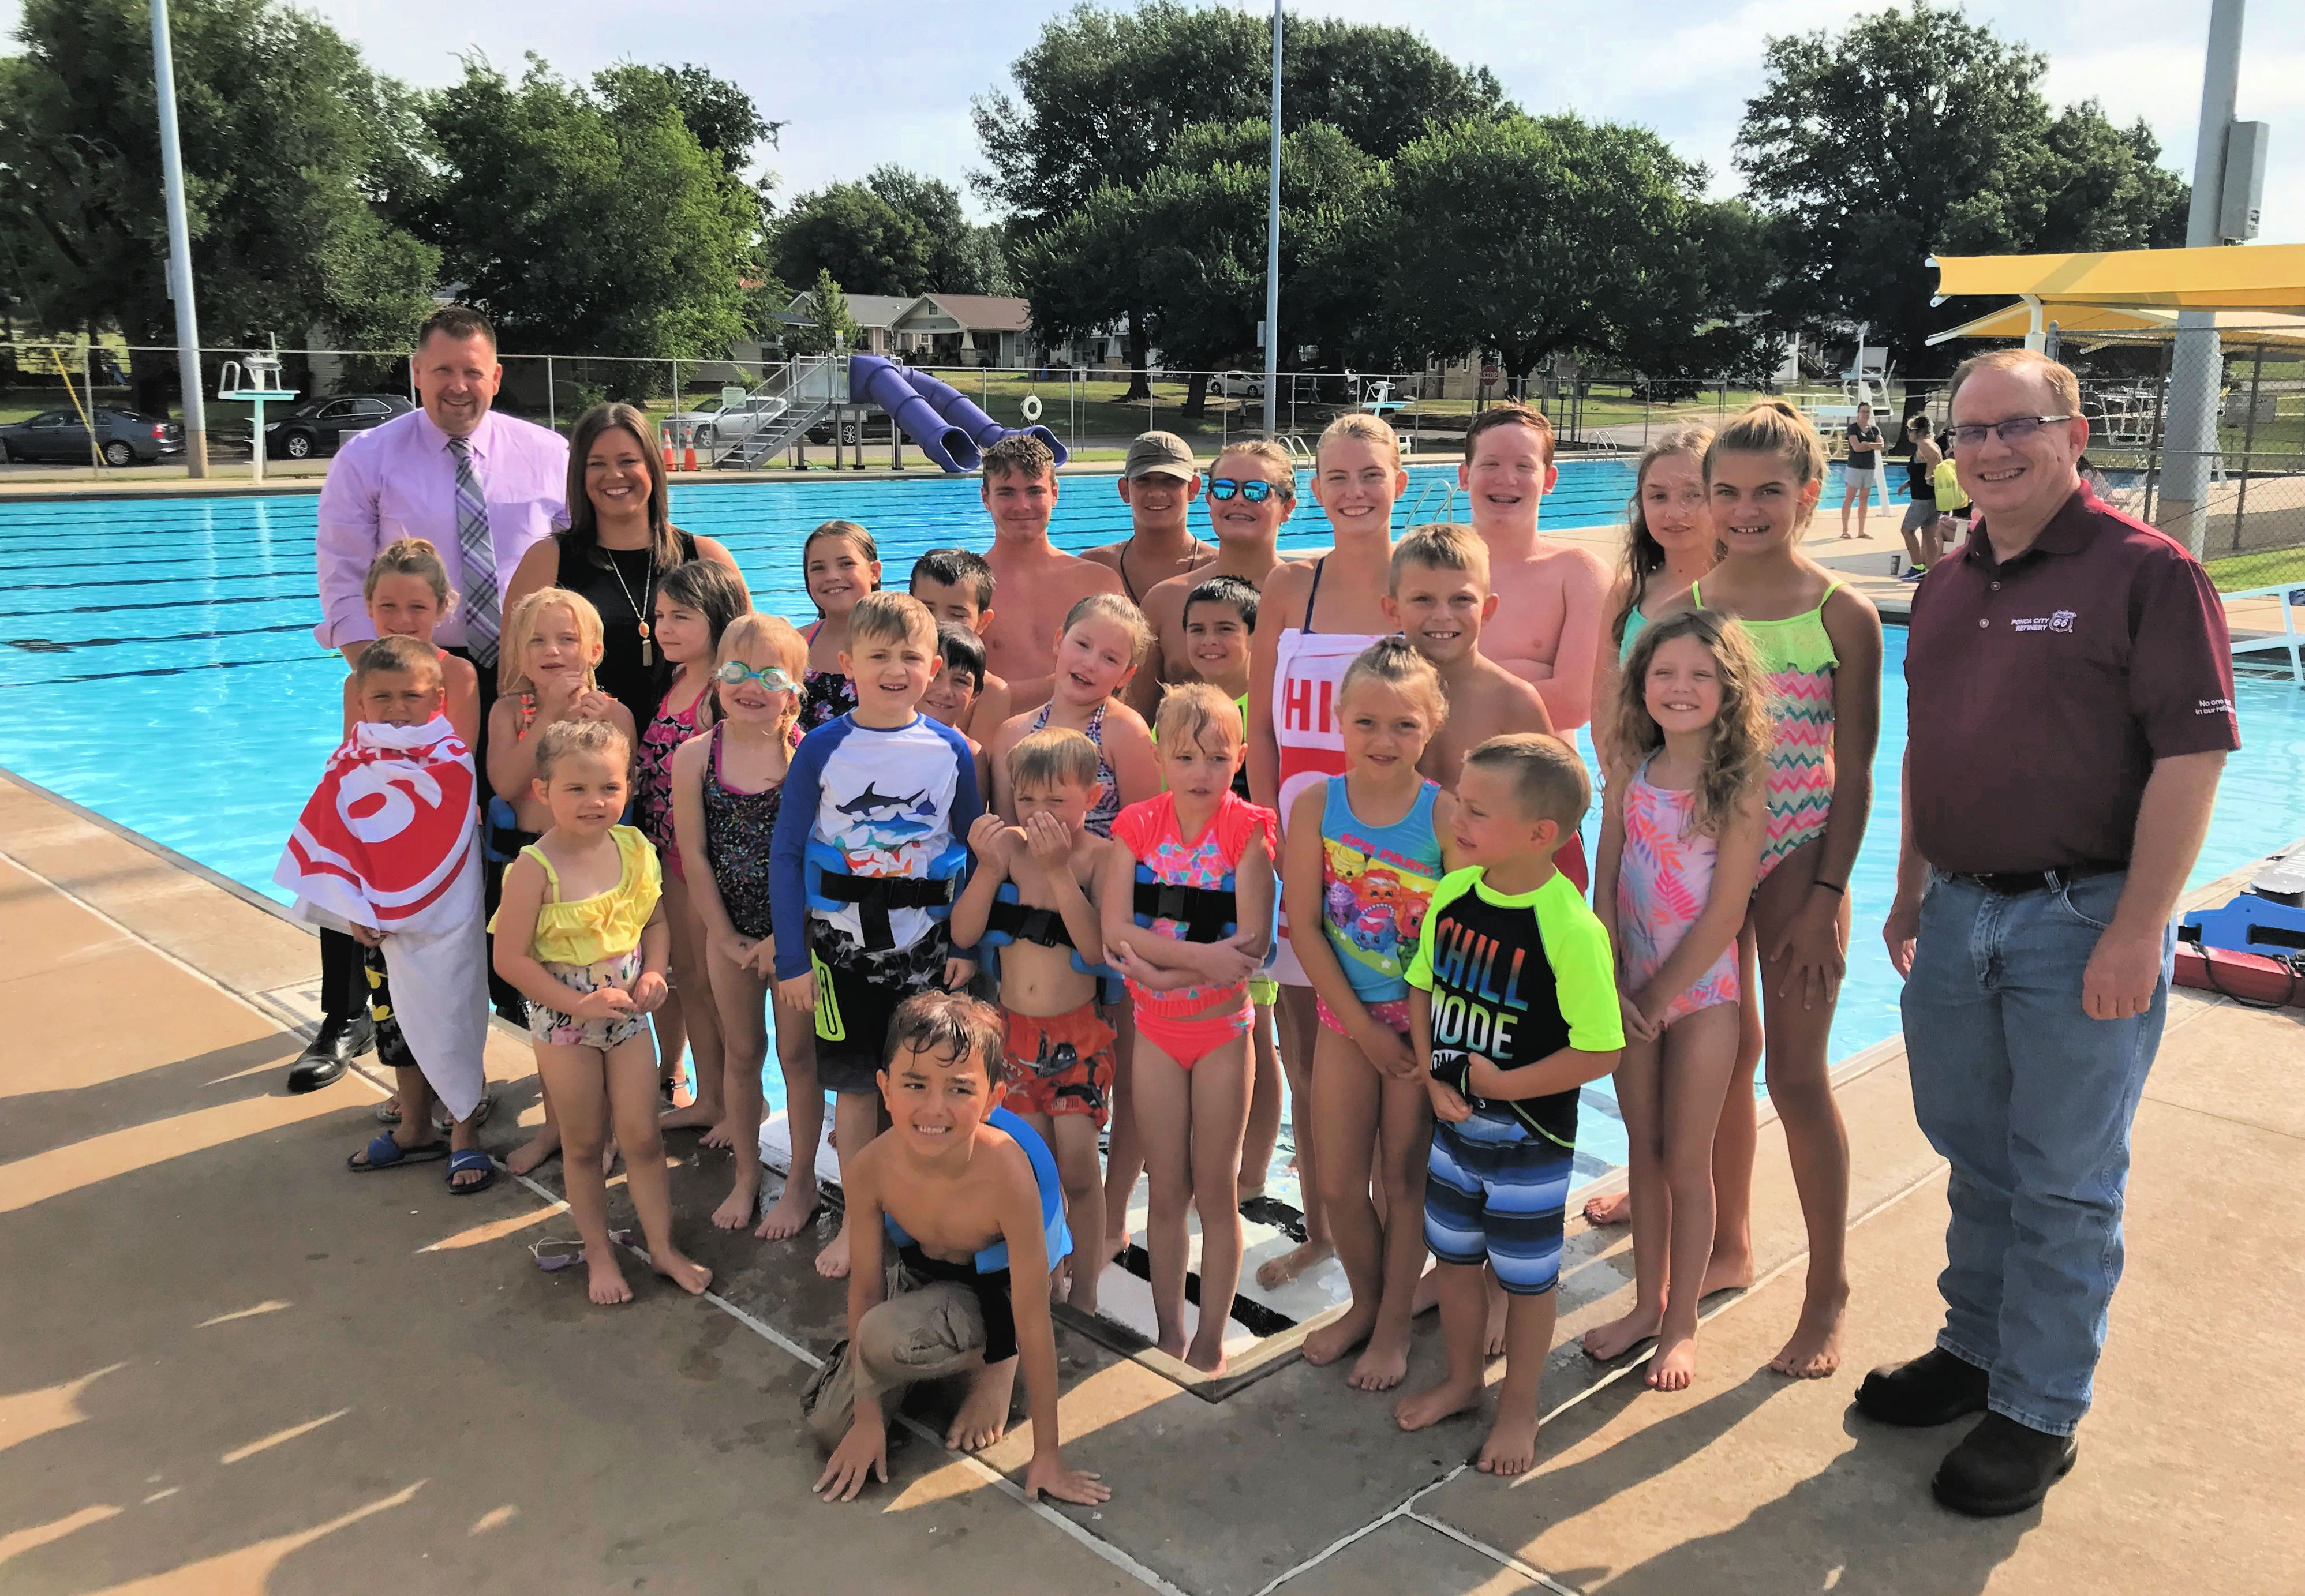 Phillips 66 continues to provide free swim lessons for children